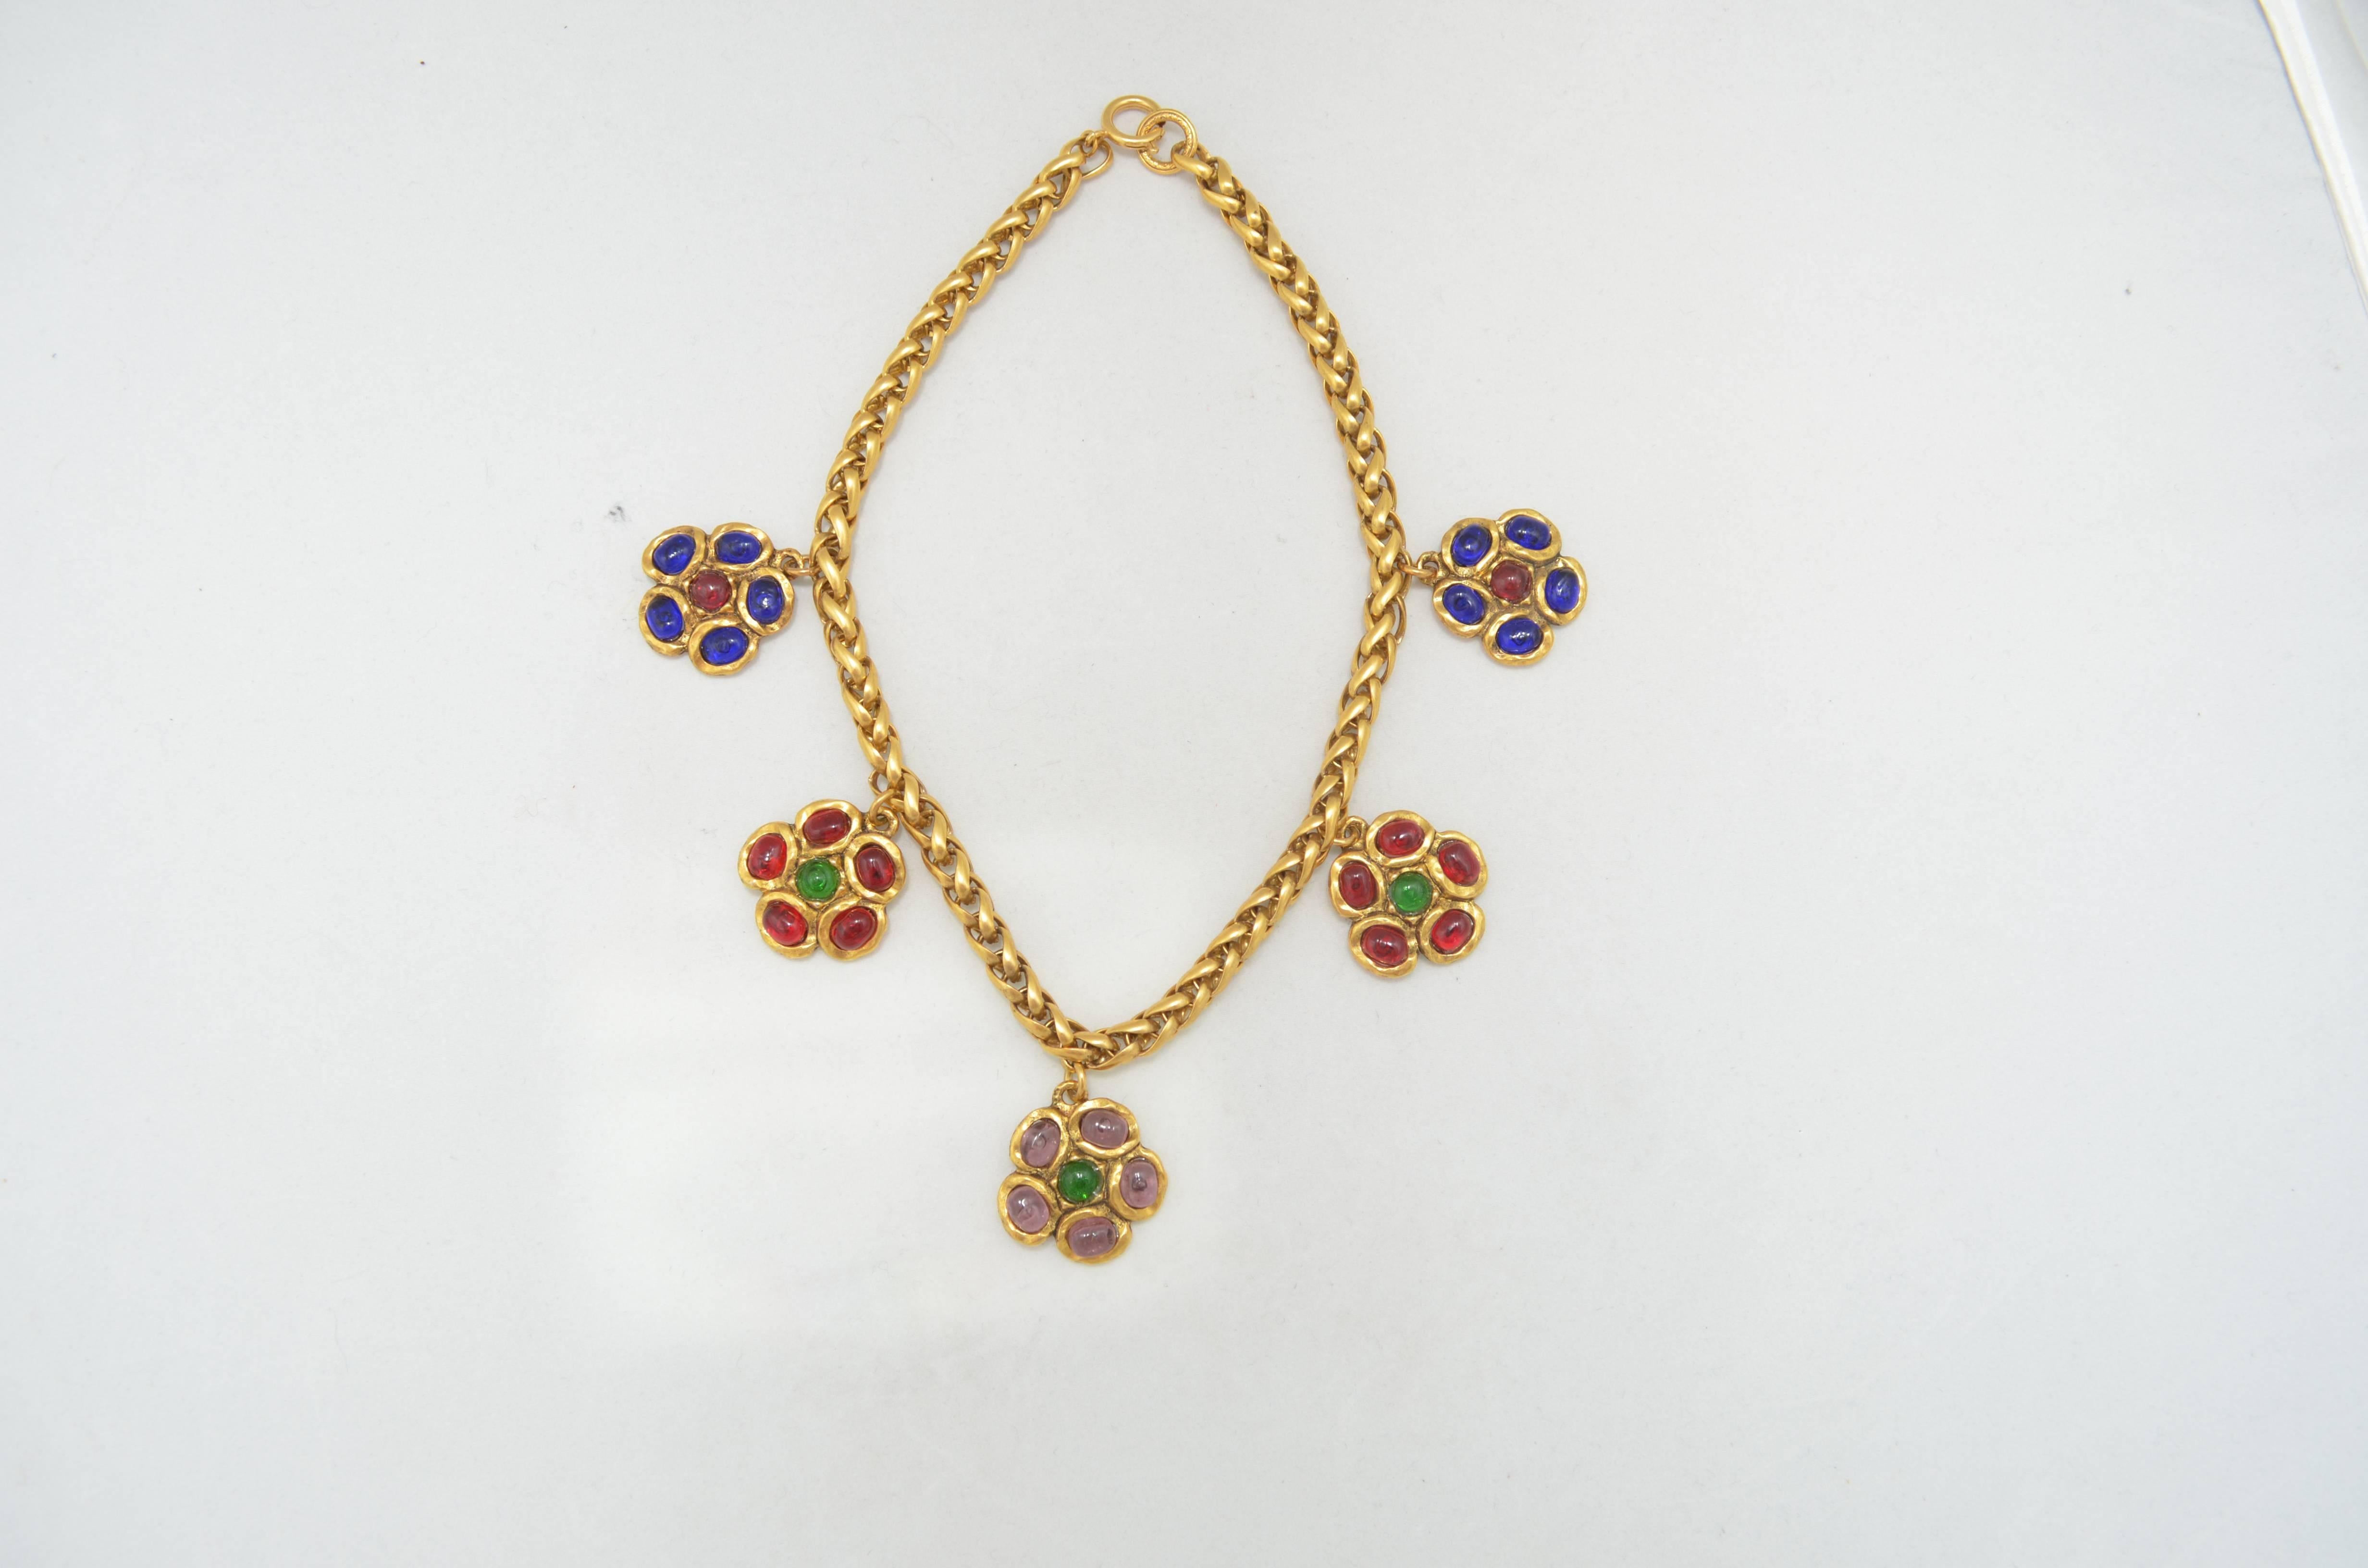 Chanel 1981 Gripoix Flower Necklace with goldstone woven rope chain, and 5 flower drops featuring lavender and green center flower, red and green flowers and blue and red flowers. Circular Chanel id plate on the back of center flower reads Chanel